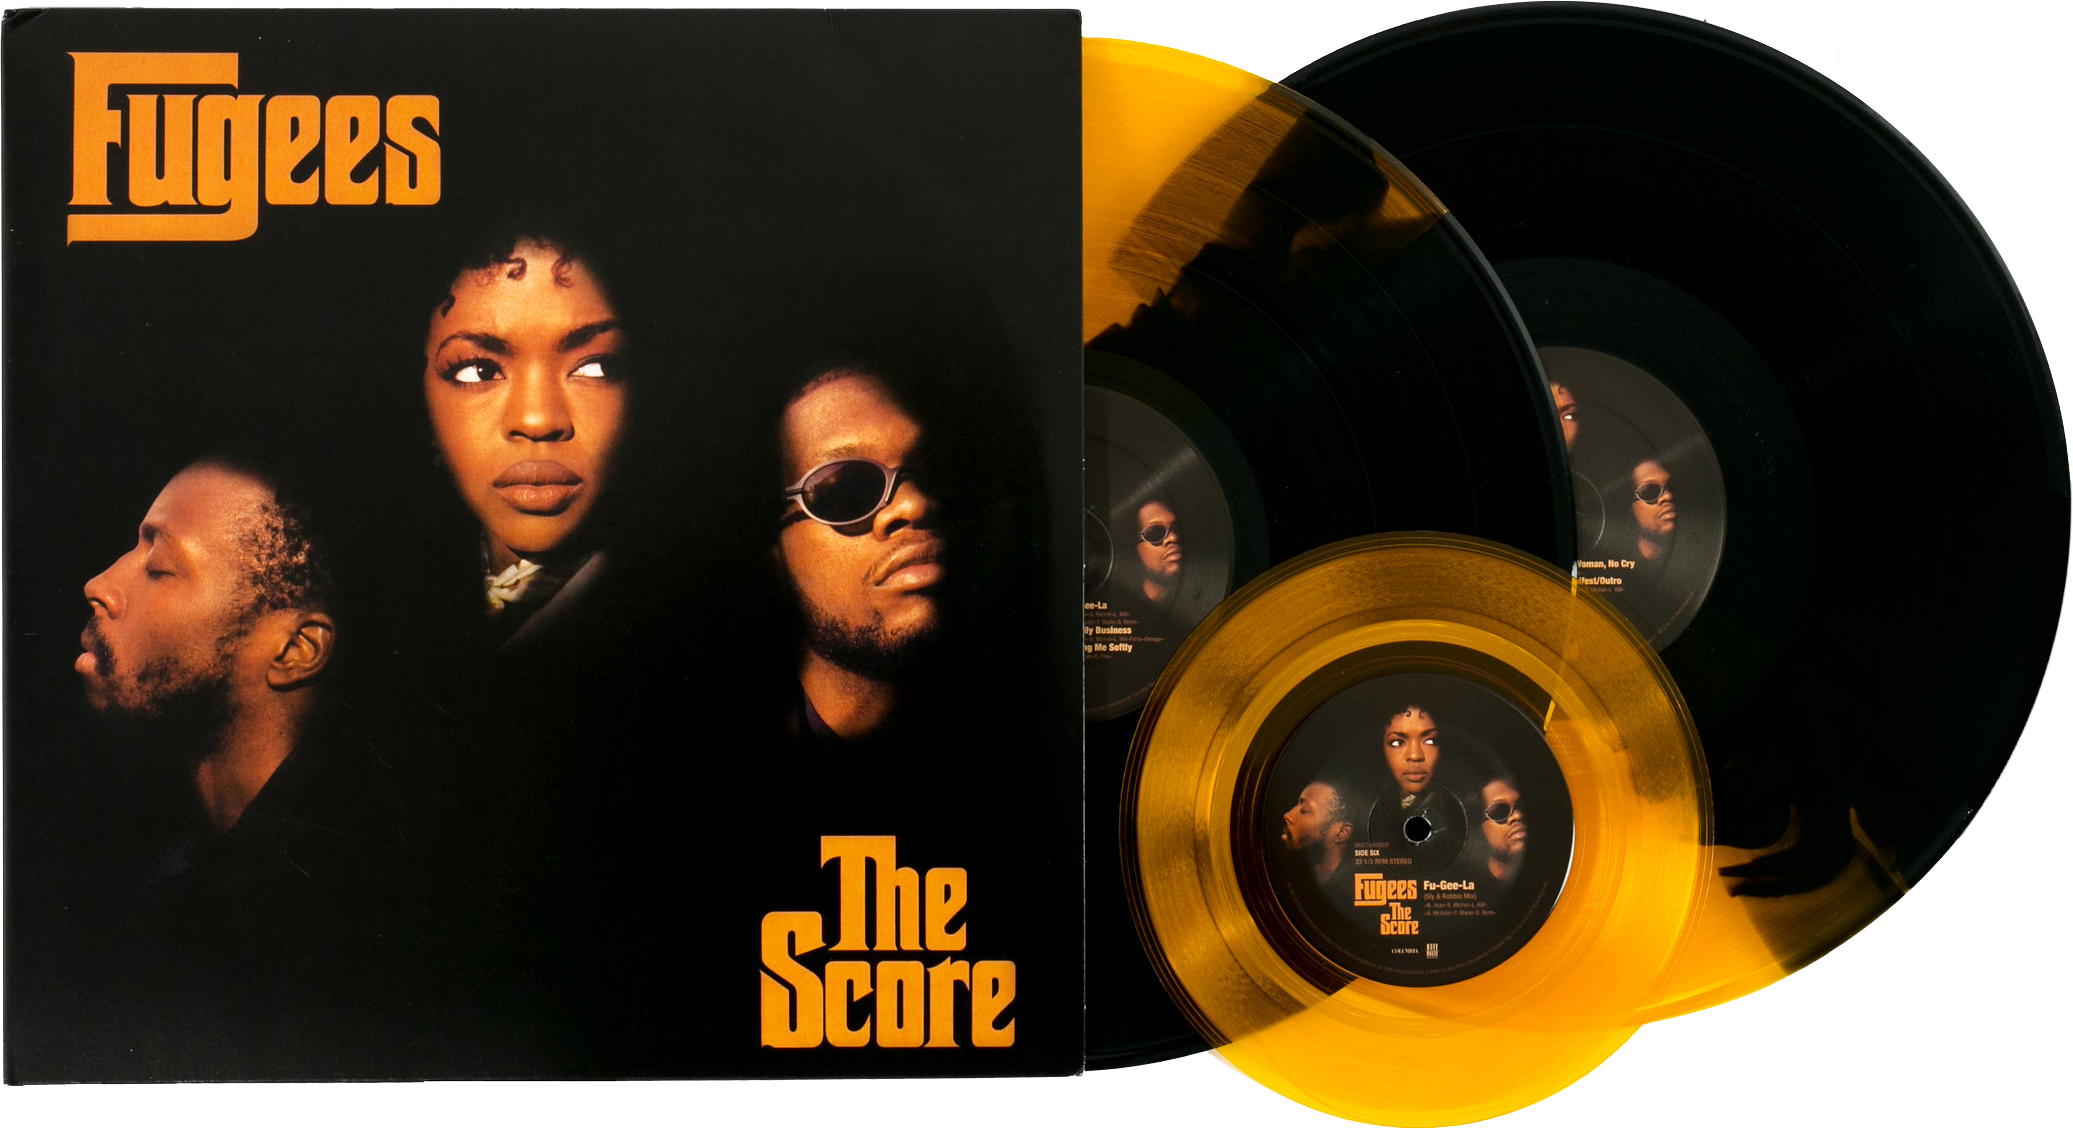 The Fugees - The Score - Me, Please